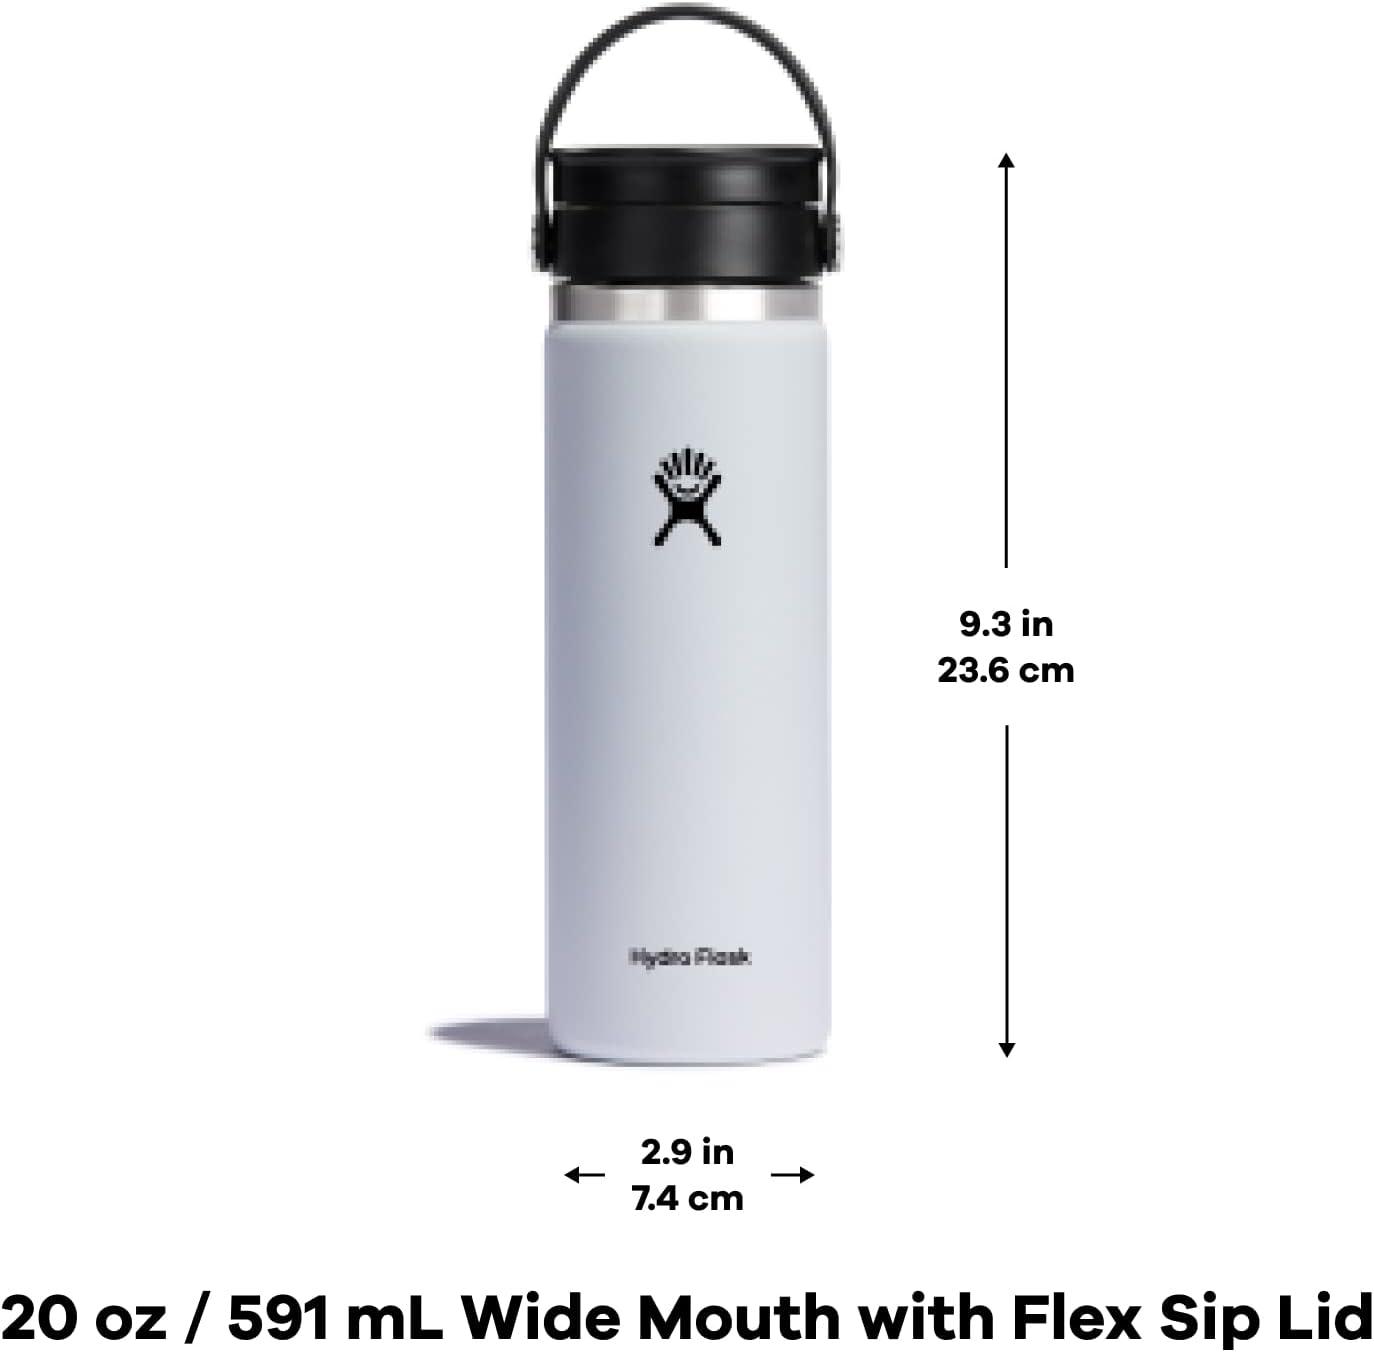  Hydro Flask 20 oz Wide Mouth Bottle with Flex Sip Lid